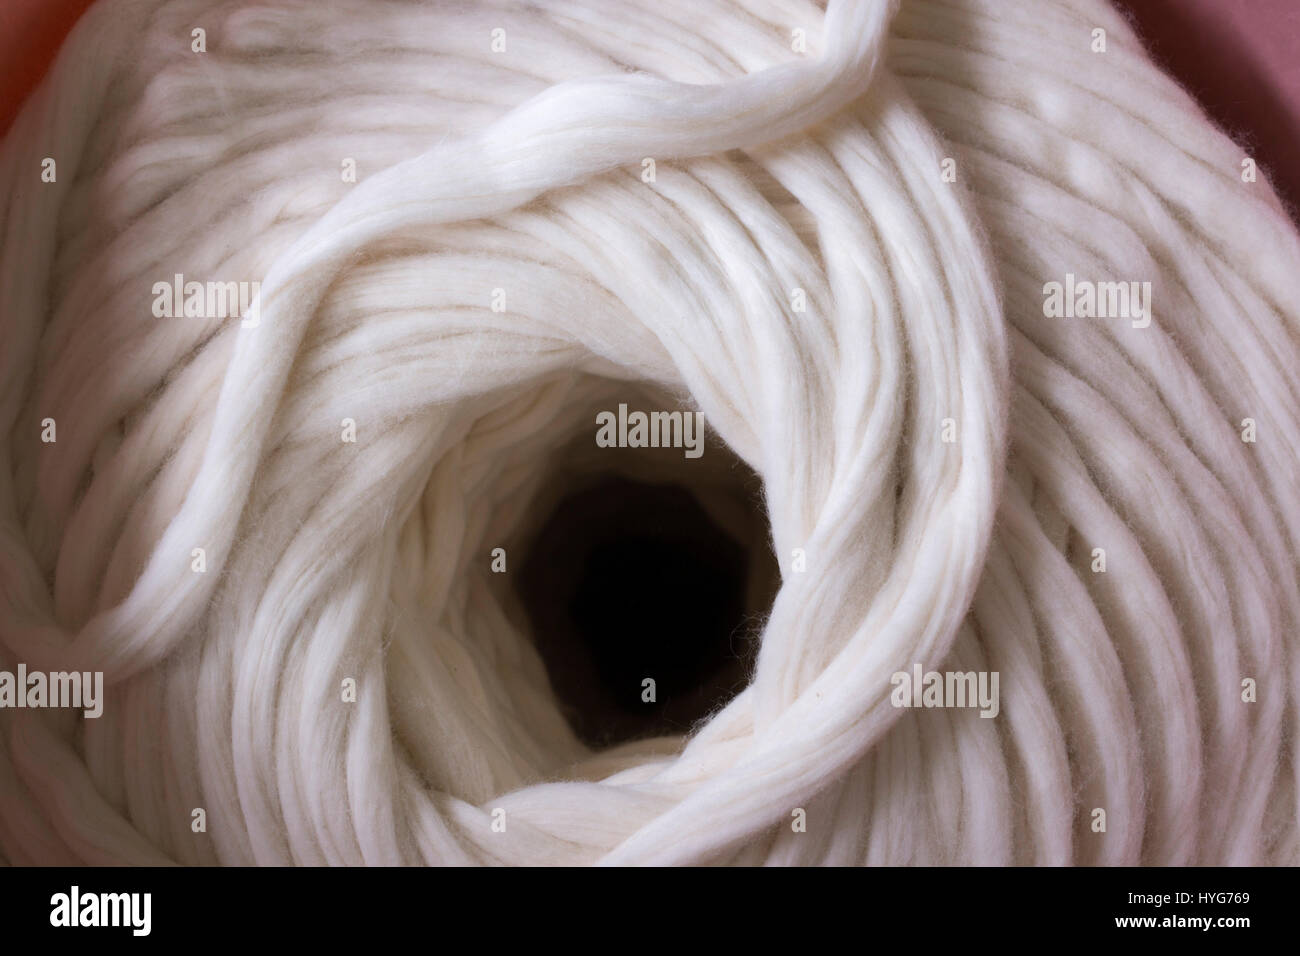 Cotton being processed to form yarn at a factory in Kampala, Uganda, owned by Fine Spinners Uganda Ltd. Stock Photo